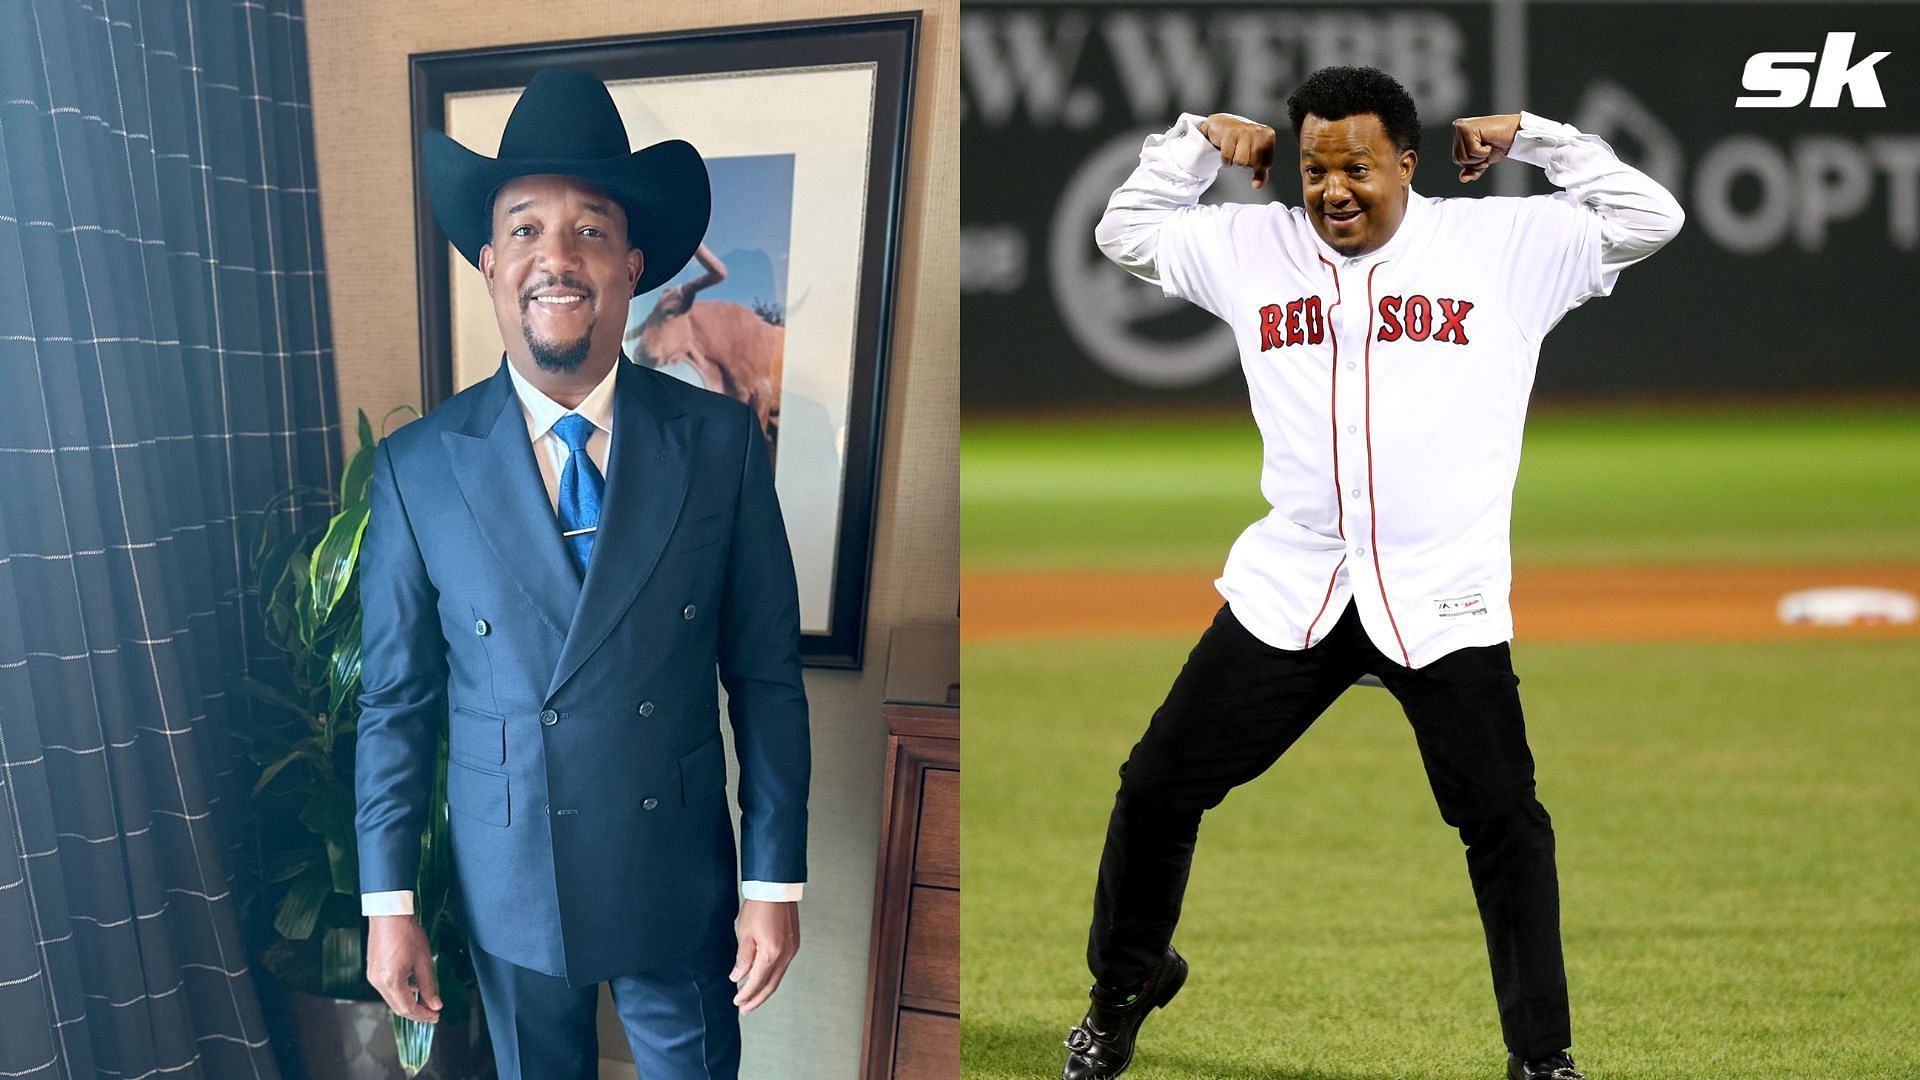 Former MLB star Pedro Martinez has implicitly backed the Texas Rangers in the World Series